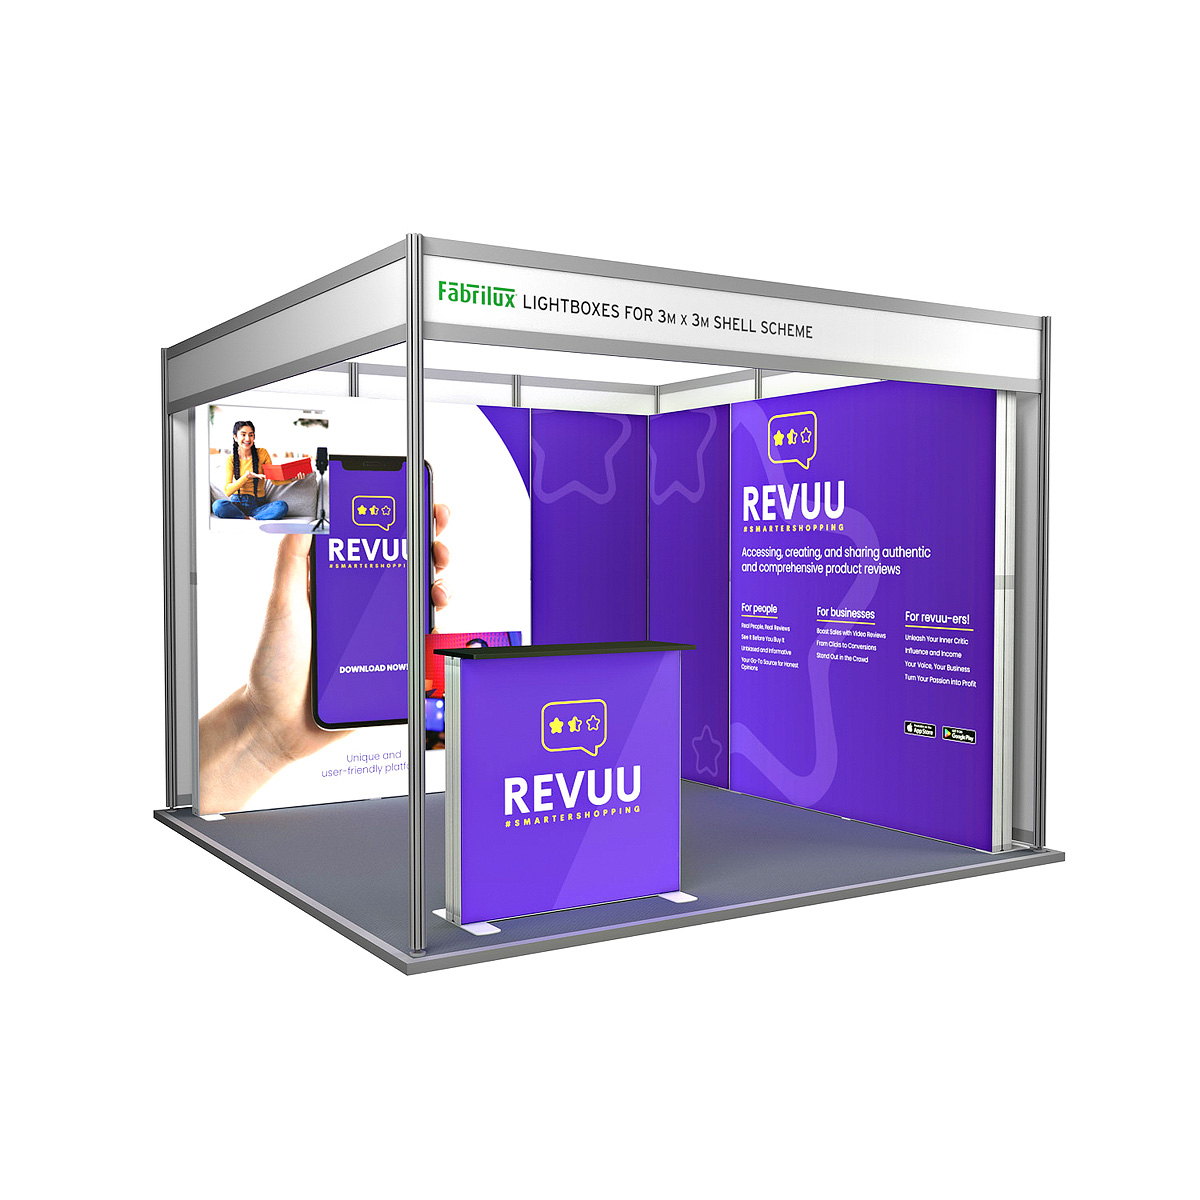 3m x 3m FABRILUX<sup>®</sup> LED Lightboxes Modular Exhibition Stand Shell Scheme